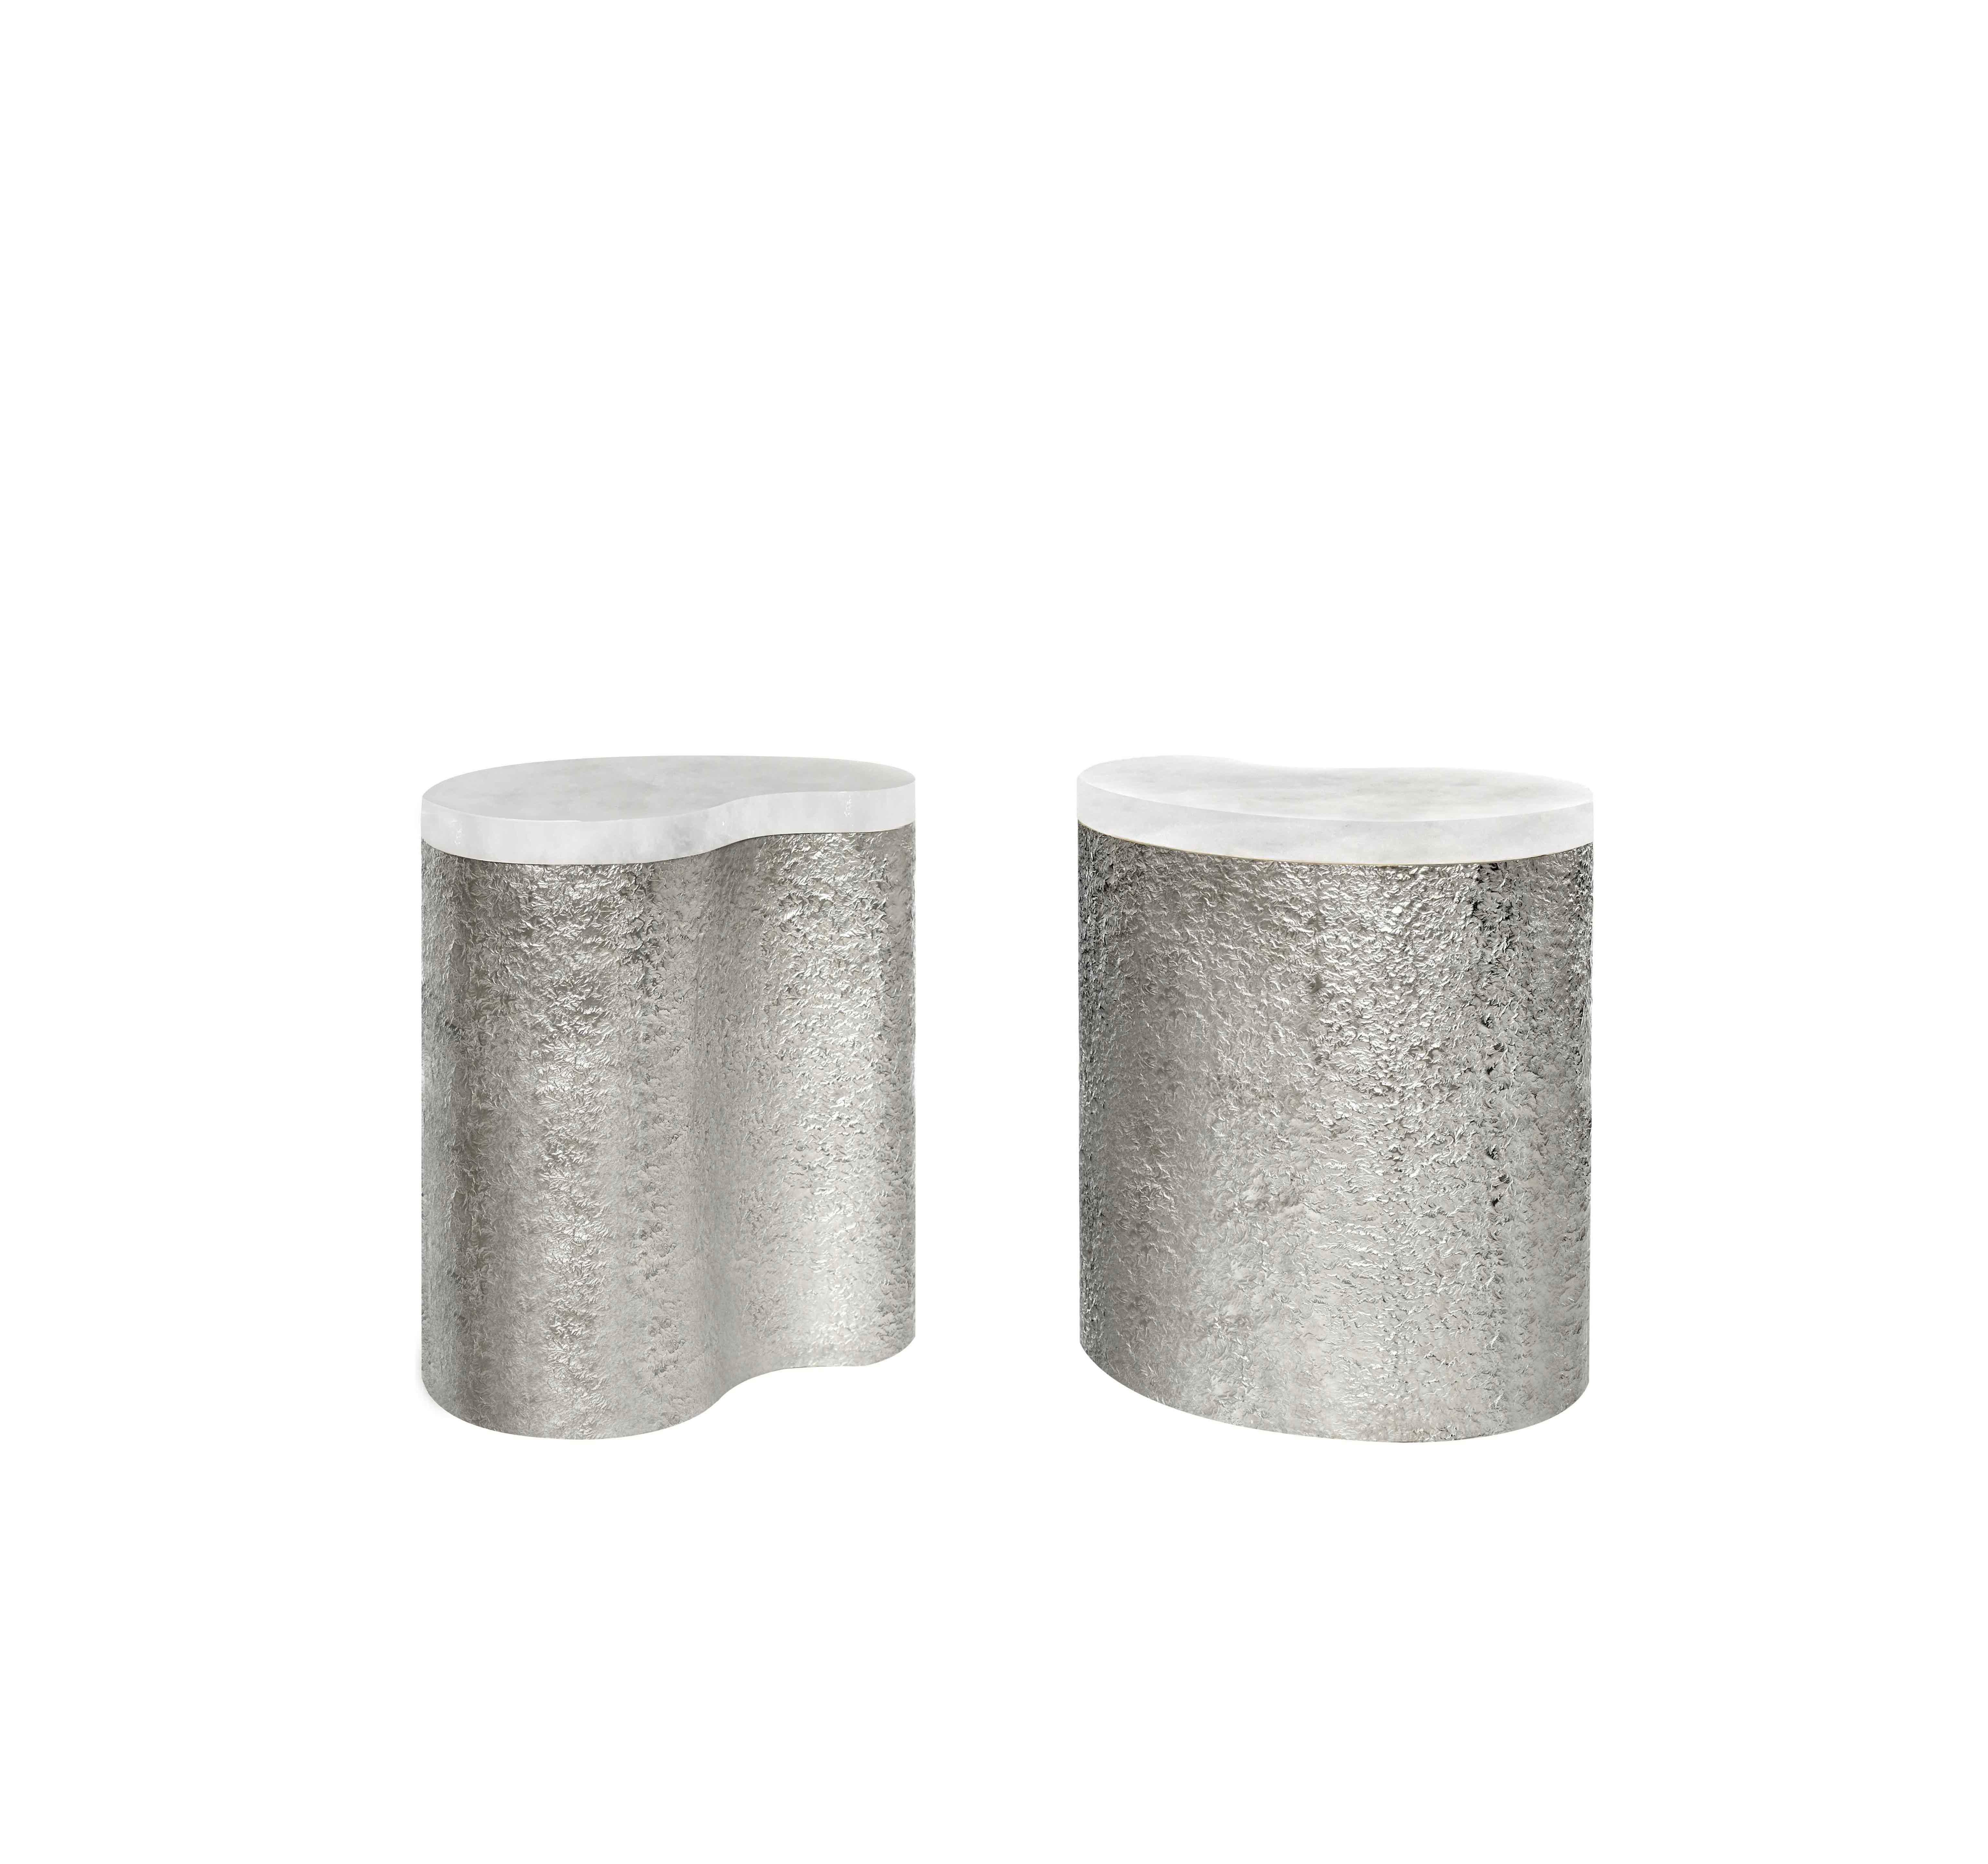 Pair of hammered nickel finish side tables with rock crystal quartz tops, created by Phoenix Gallery NYC.
Custom size and metal finish upon request.